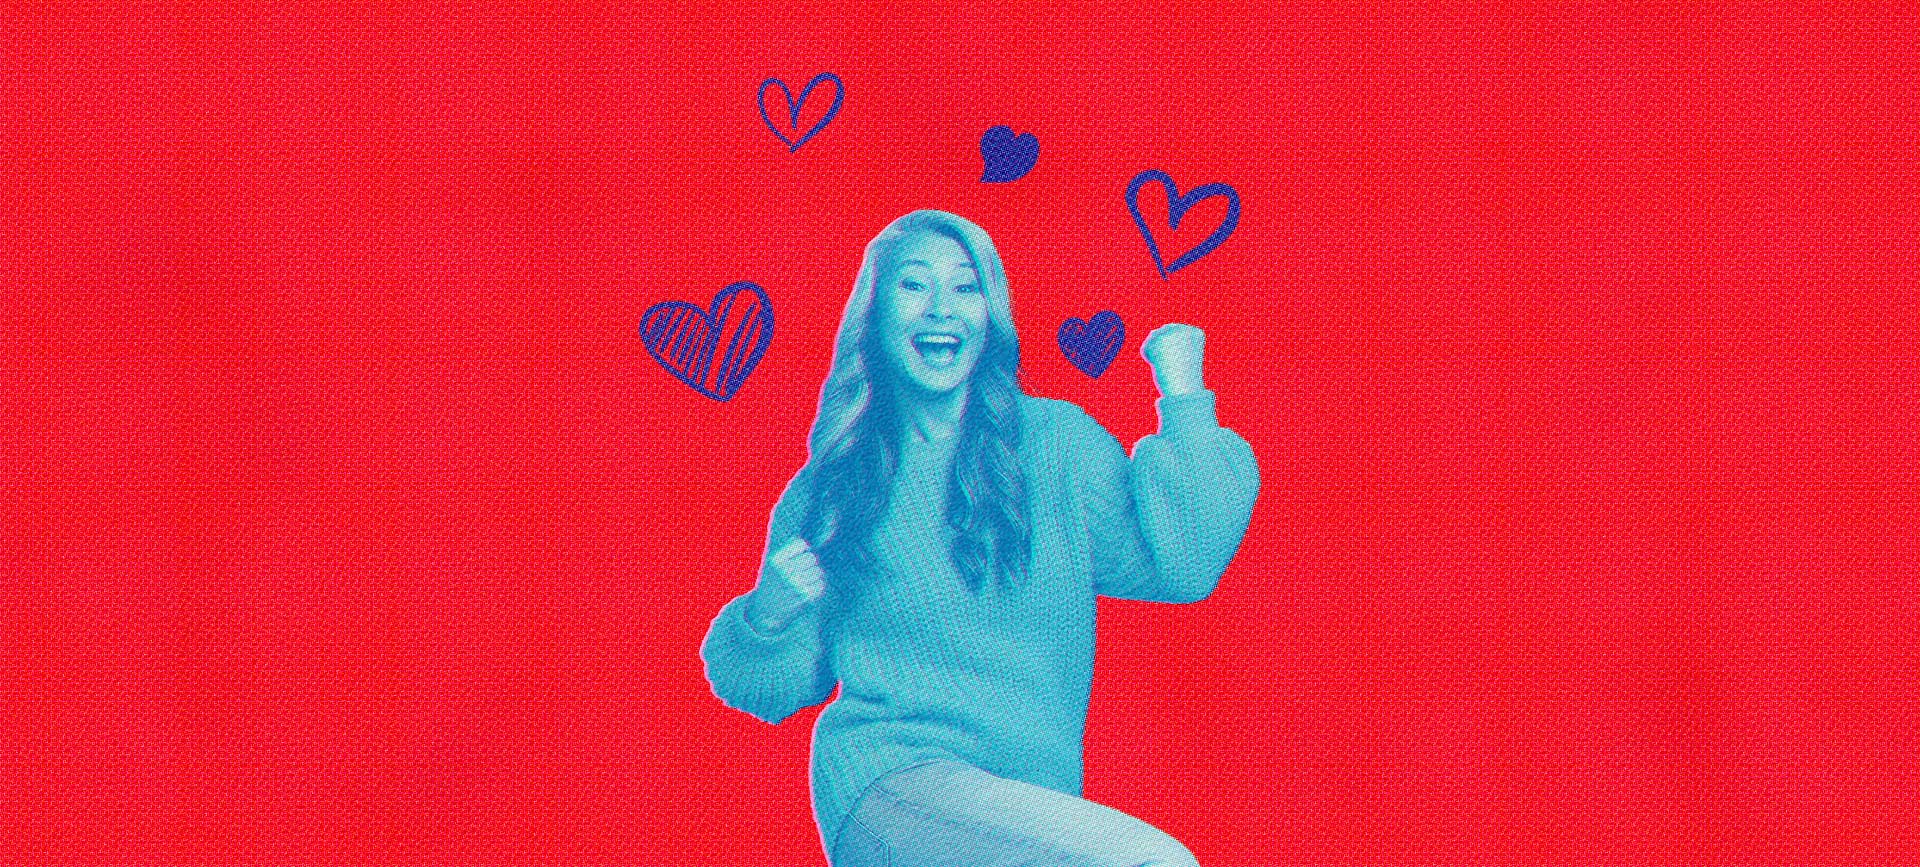 A woman cheers with blue hearts over her head against a red background.